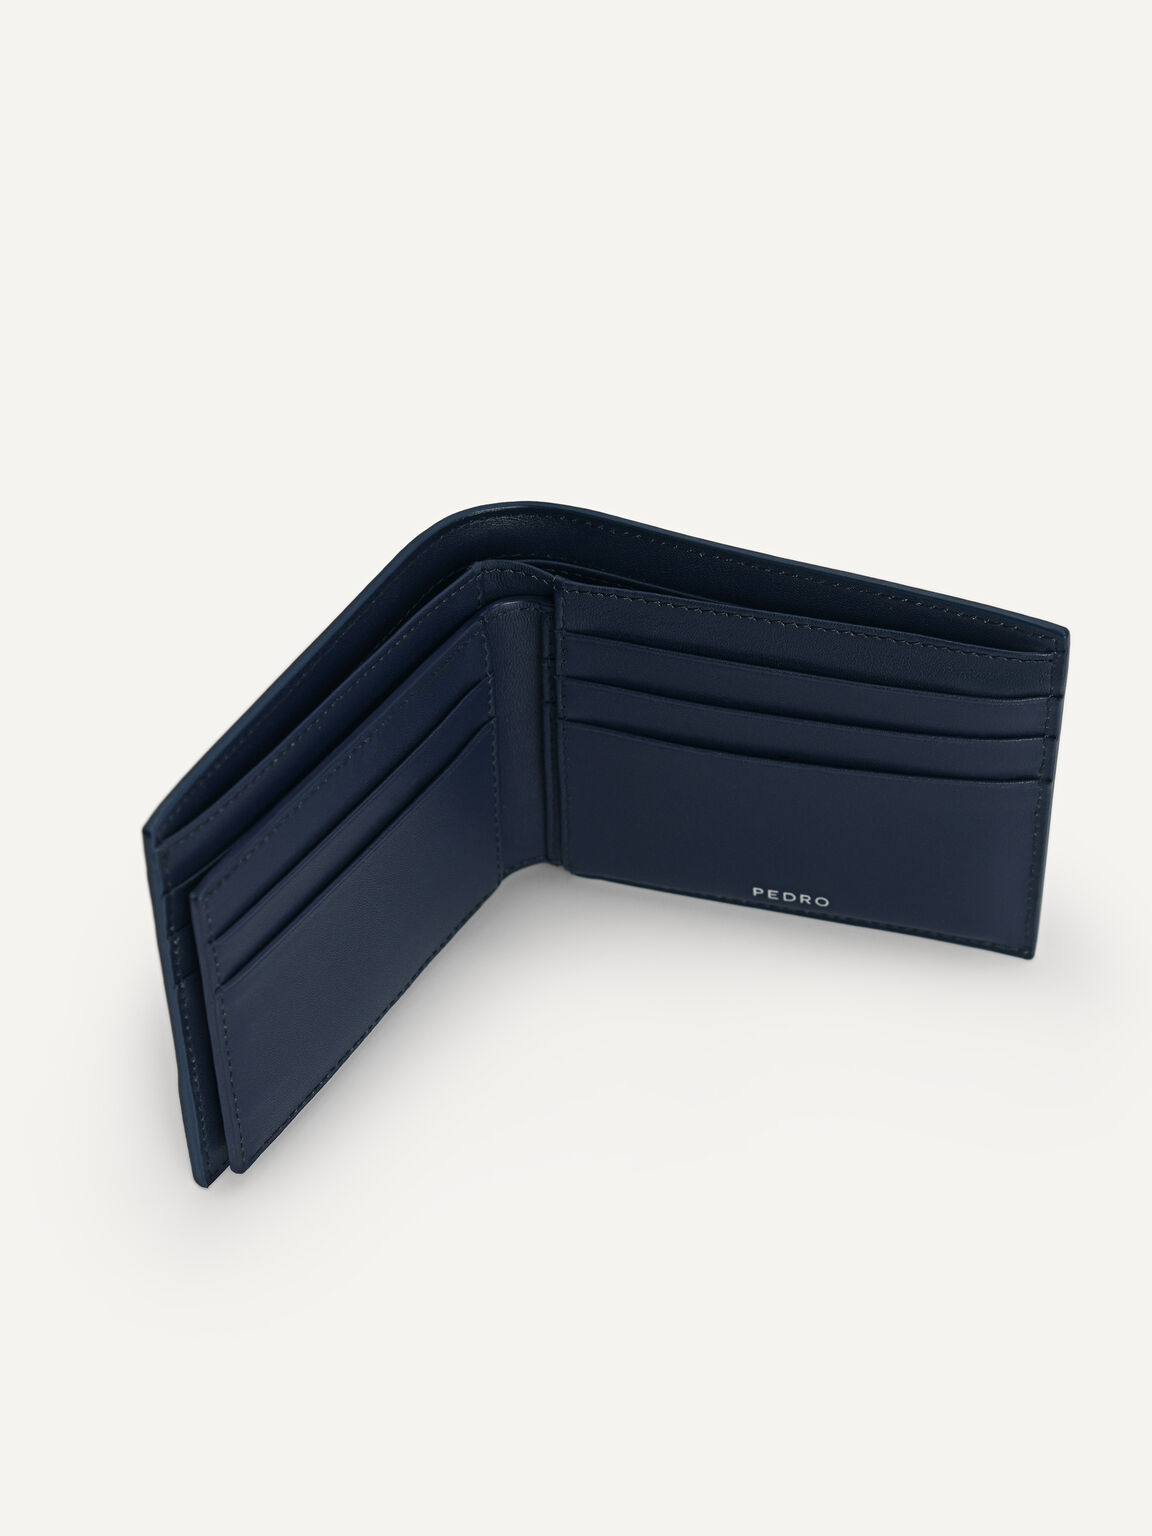 Textured Leather Wallet with Insert (RFID), Navy, hi-res